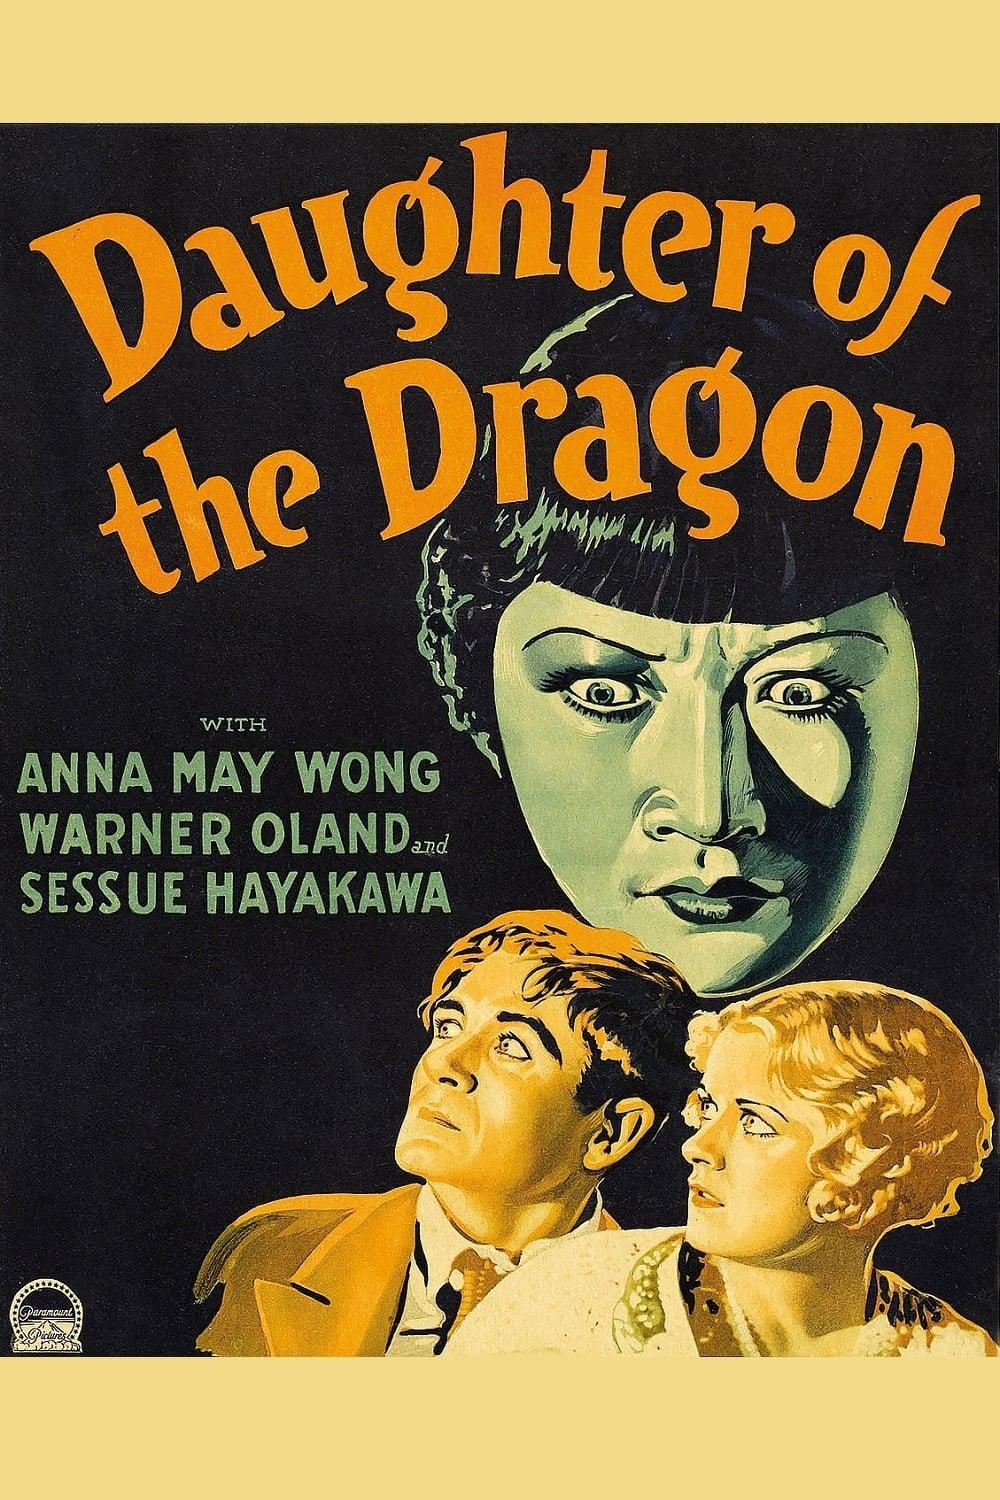 Daughter of the Dragon poster